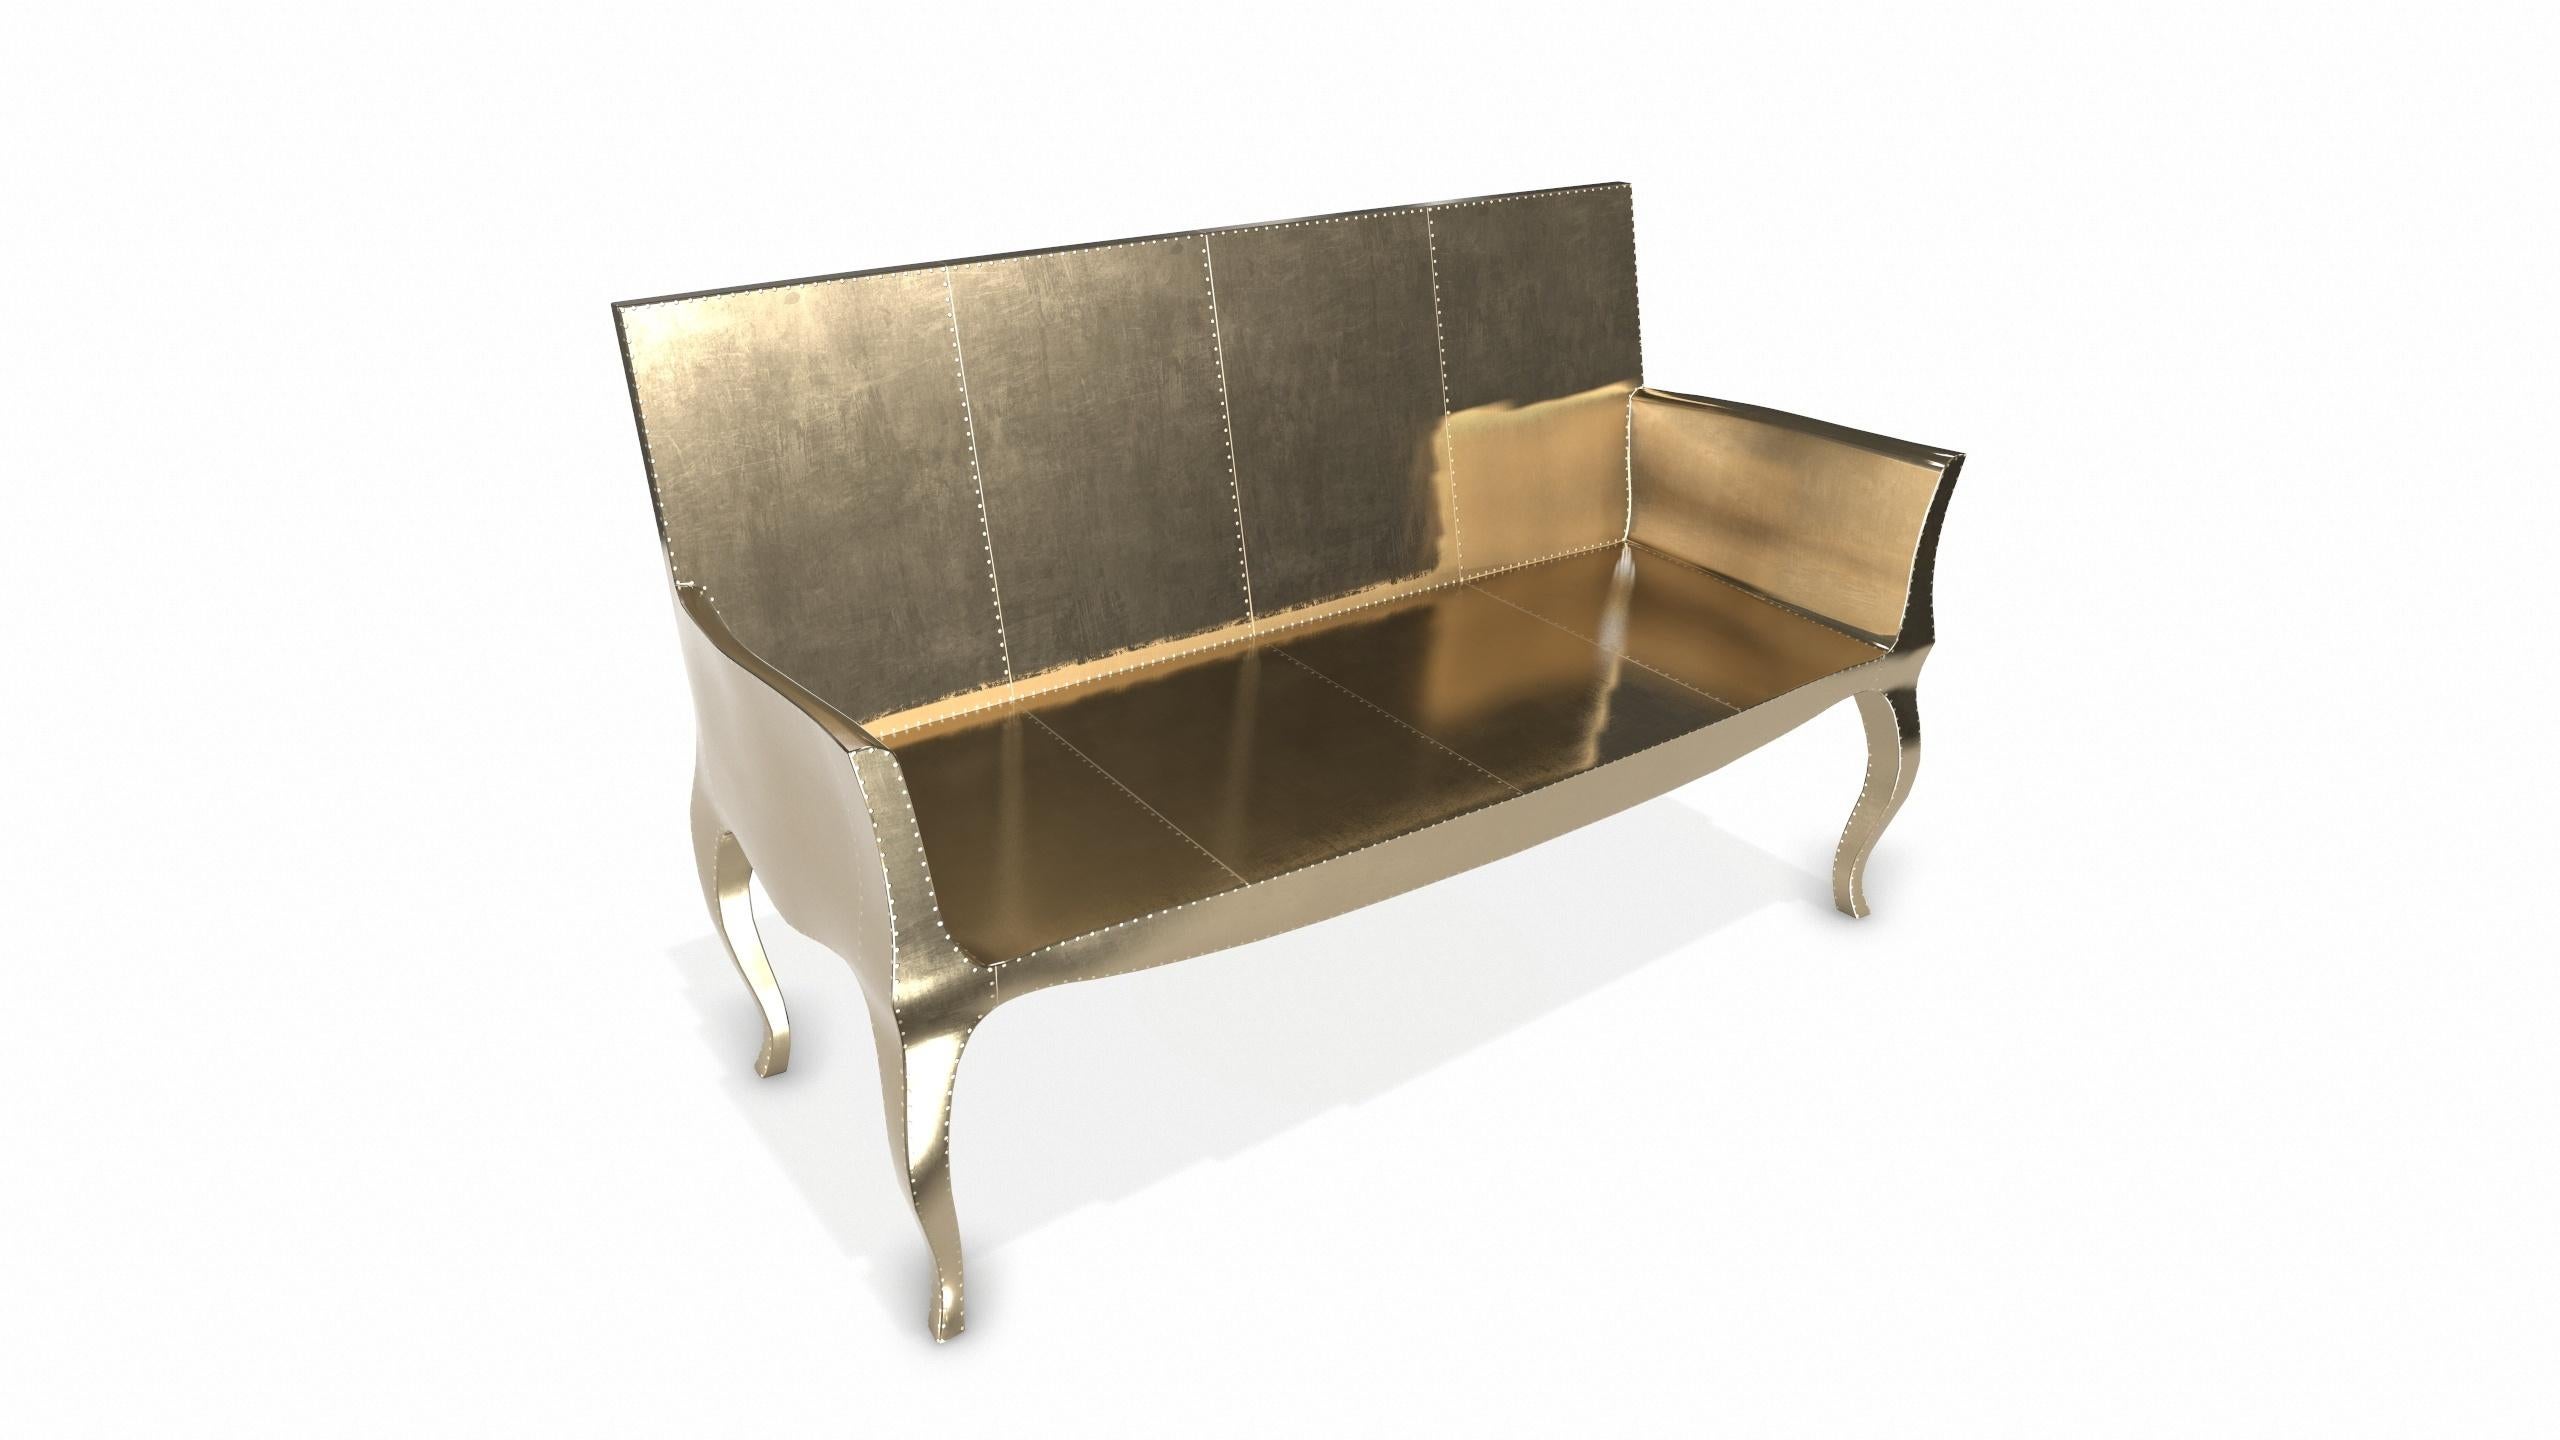 Louise Settee Art Deco Settees in Smooth Brass by Paul Mathieu for S Odegard For Sale 2